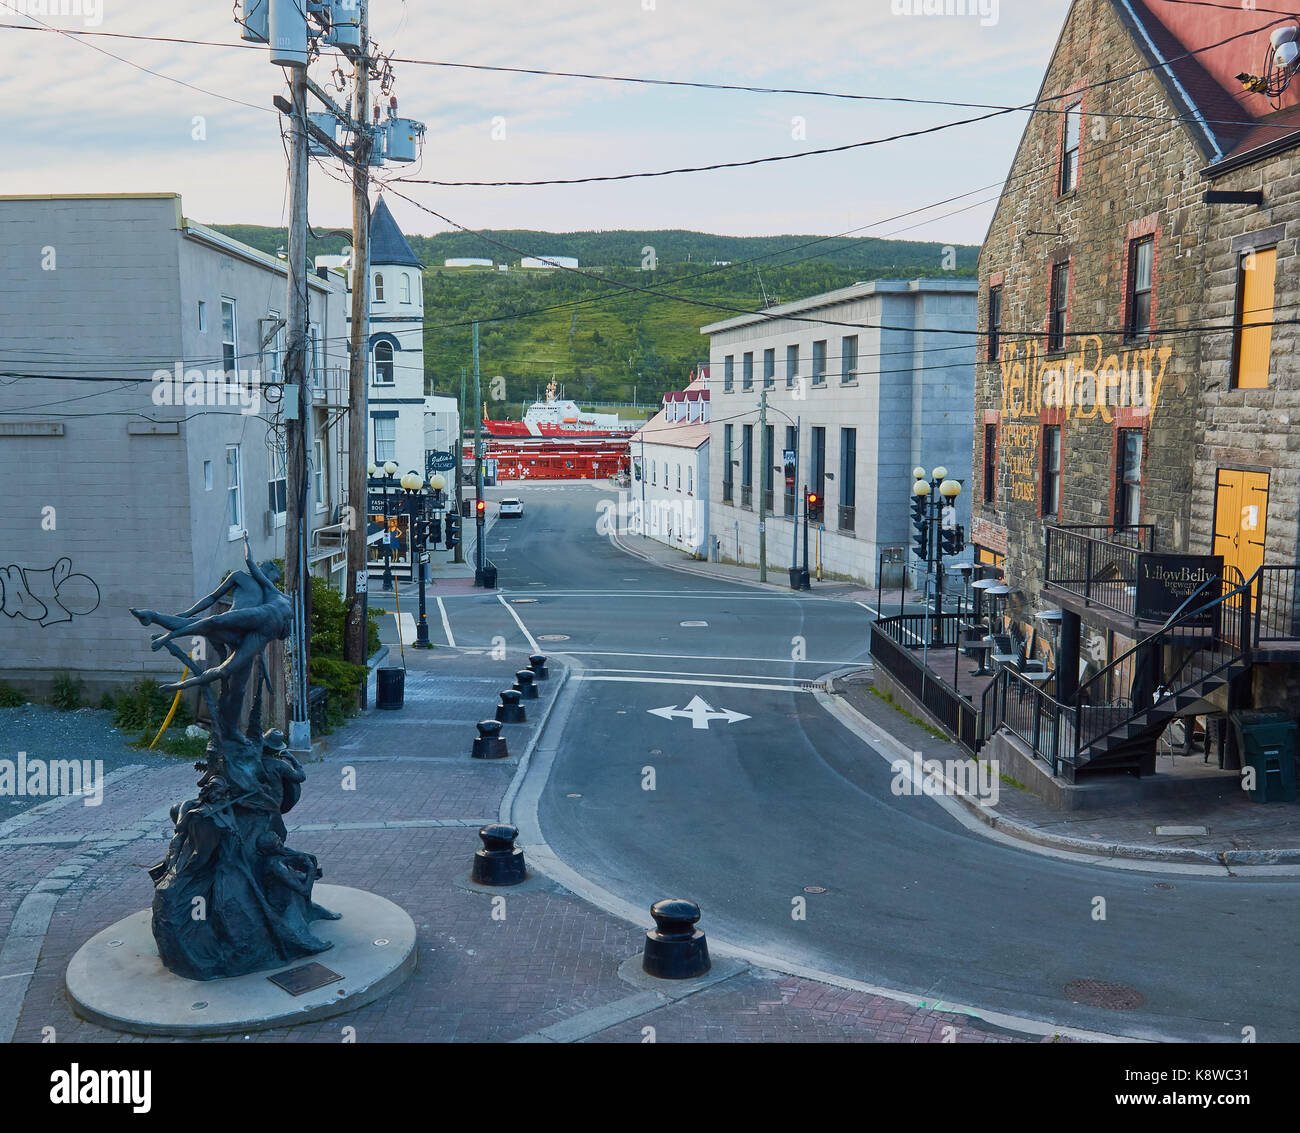 A Time, 2008 bronze sculpture by Morgan MacDonald and the Yellow Belly Brewery and pub, St John's, Newfoundland, Canada Stock Photo